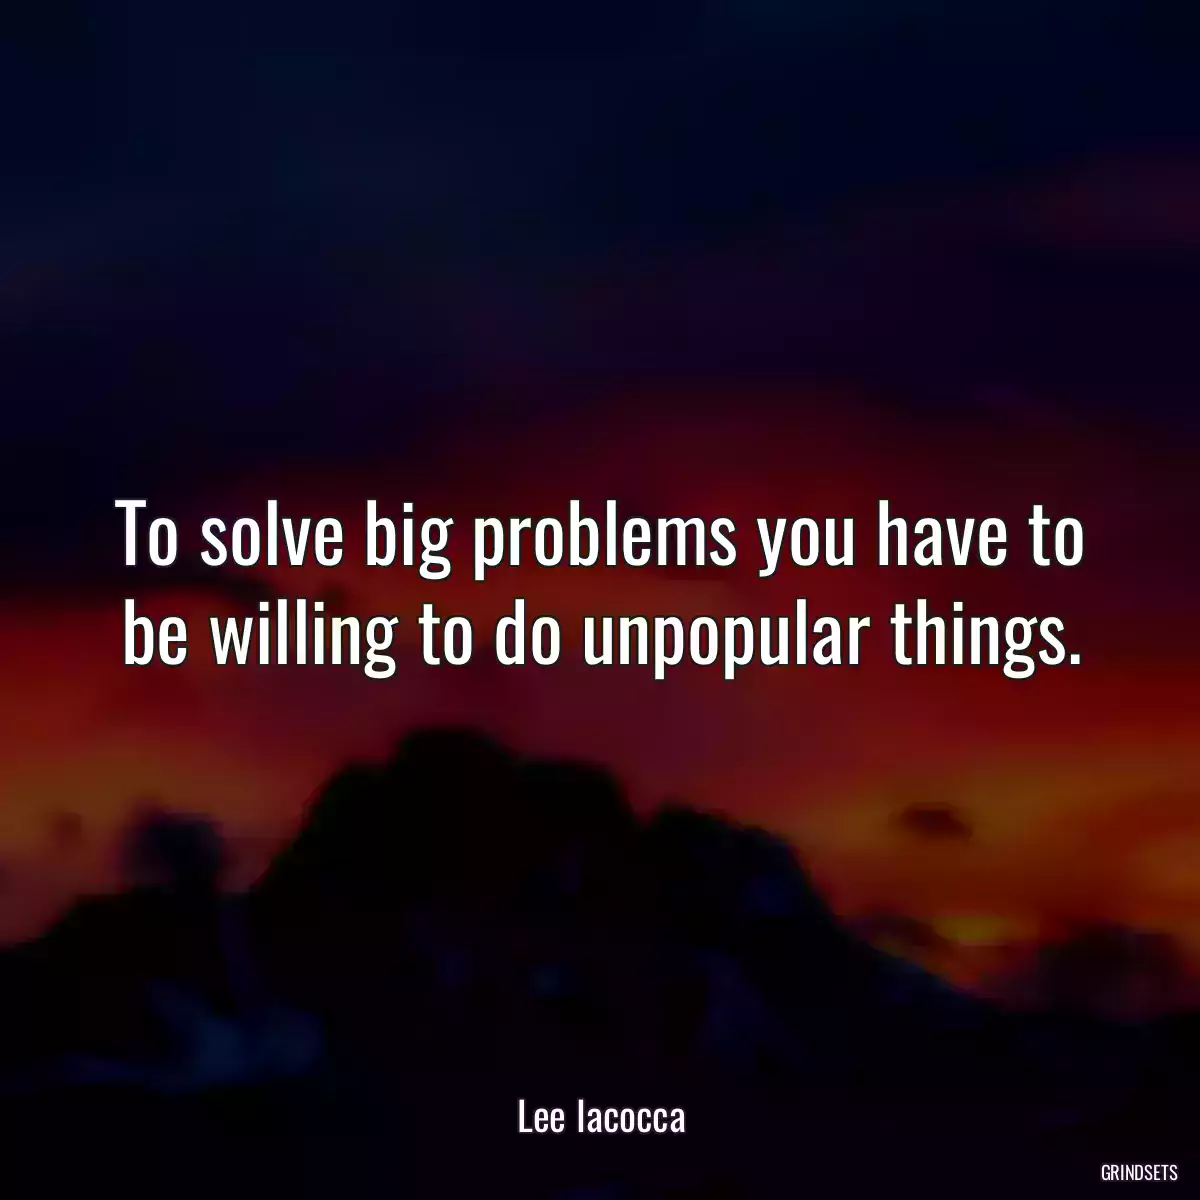 To solve big problems you have to be willing to do unpopular things.